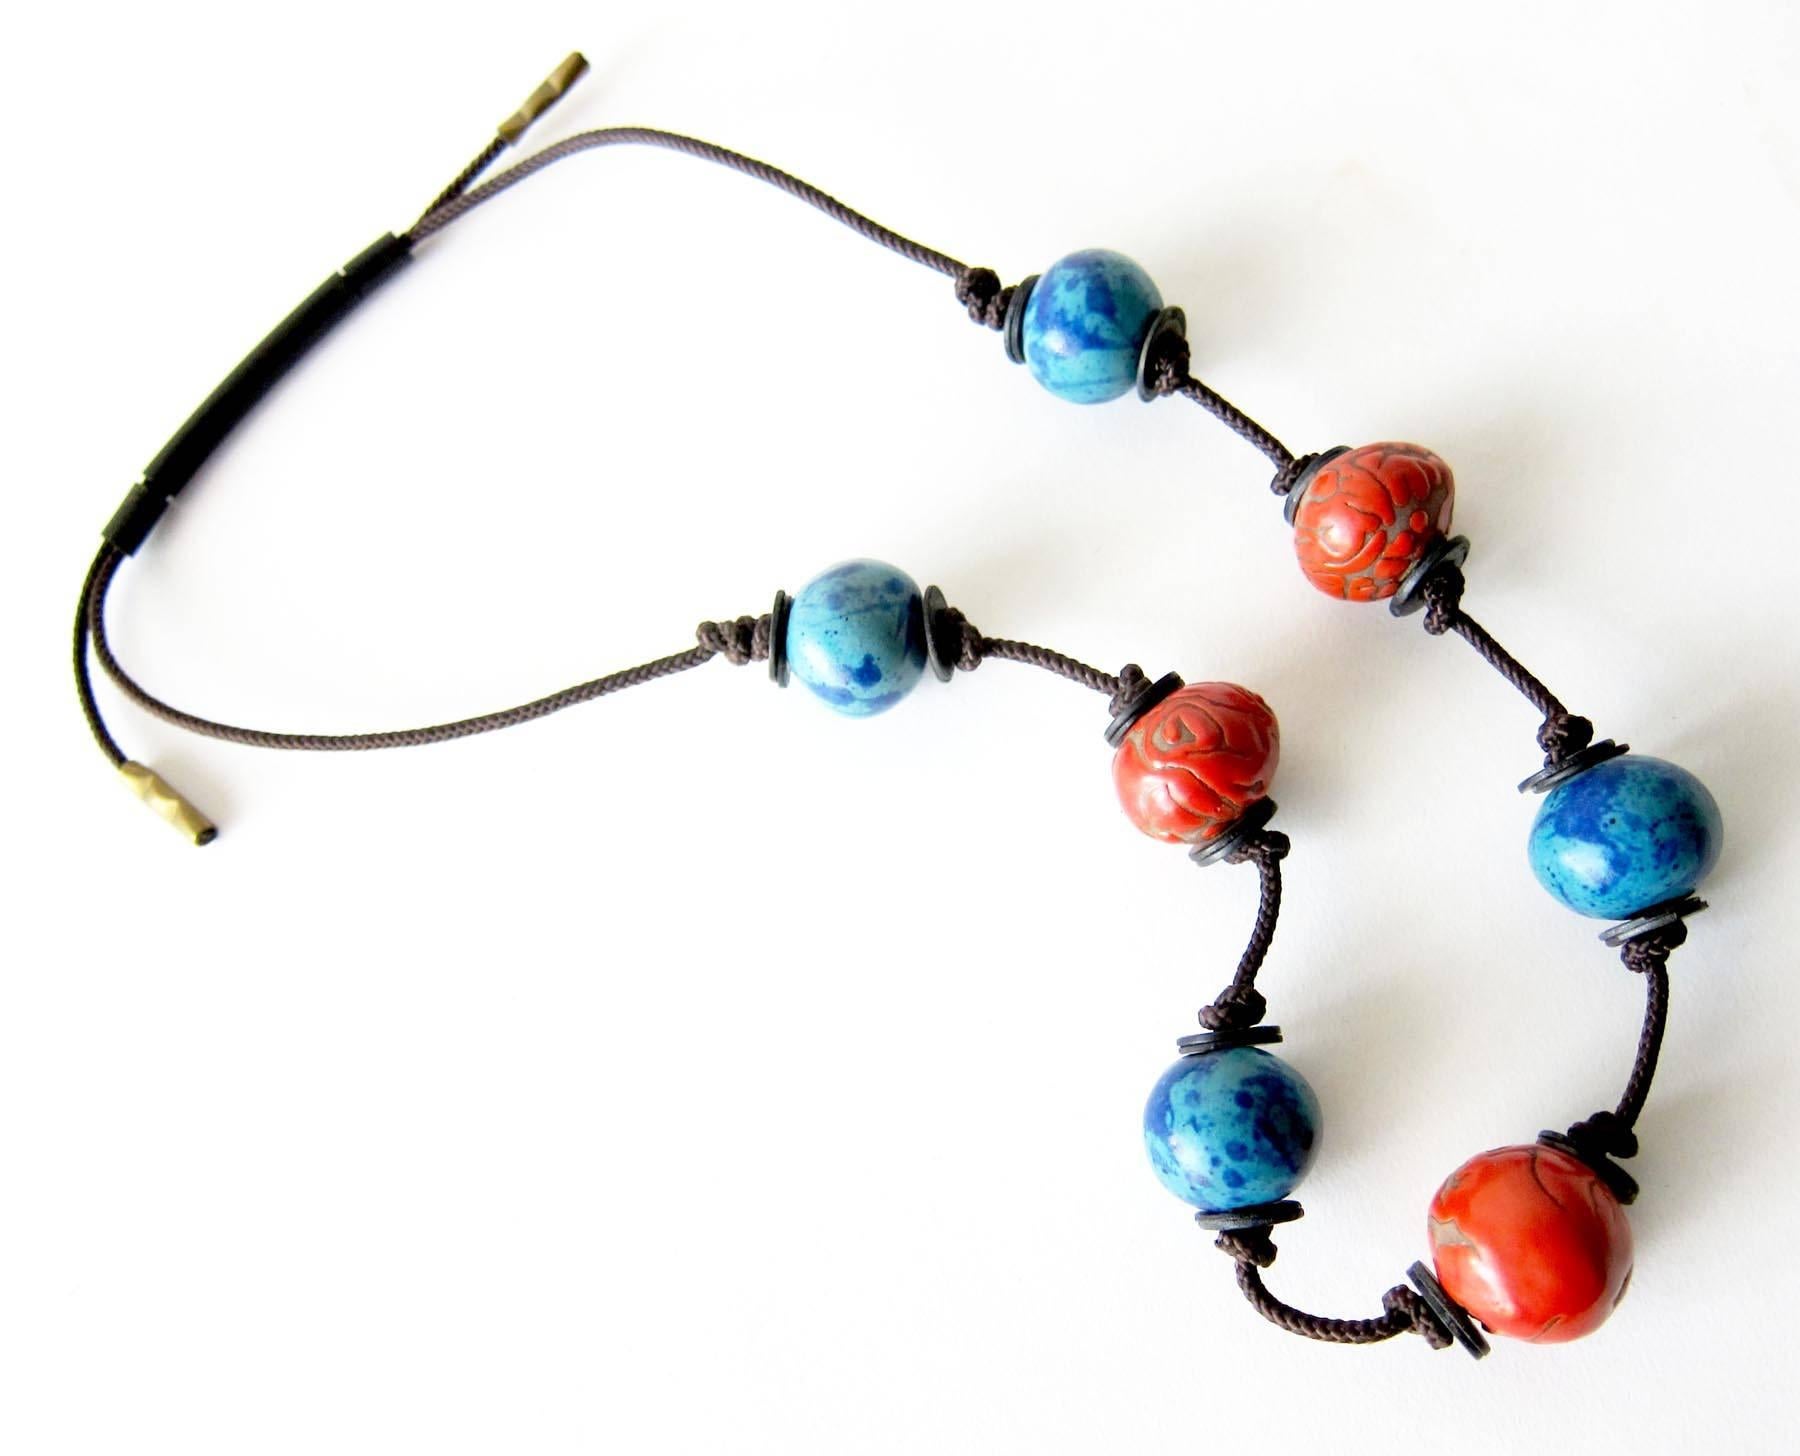 Original, vintage seven ceramic bead necklace separated by metal washers and knotted rope created by Doyle Lane of Los Angeles, California.  Necklace measures 26